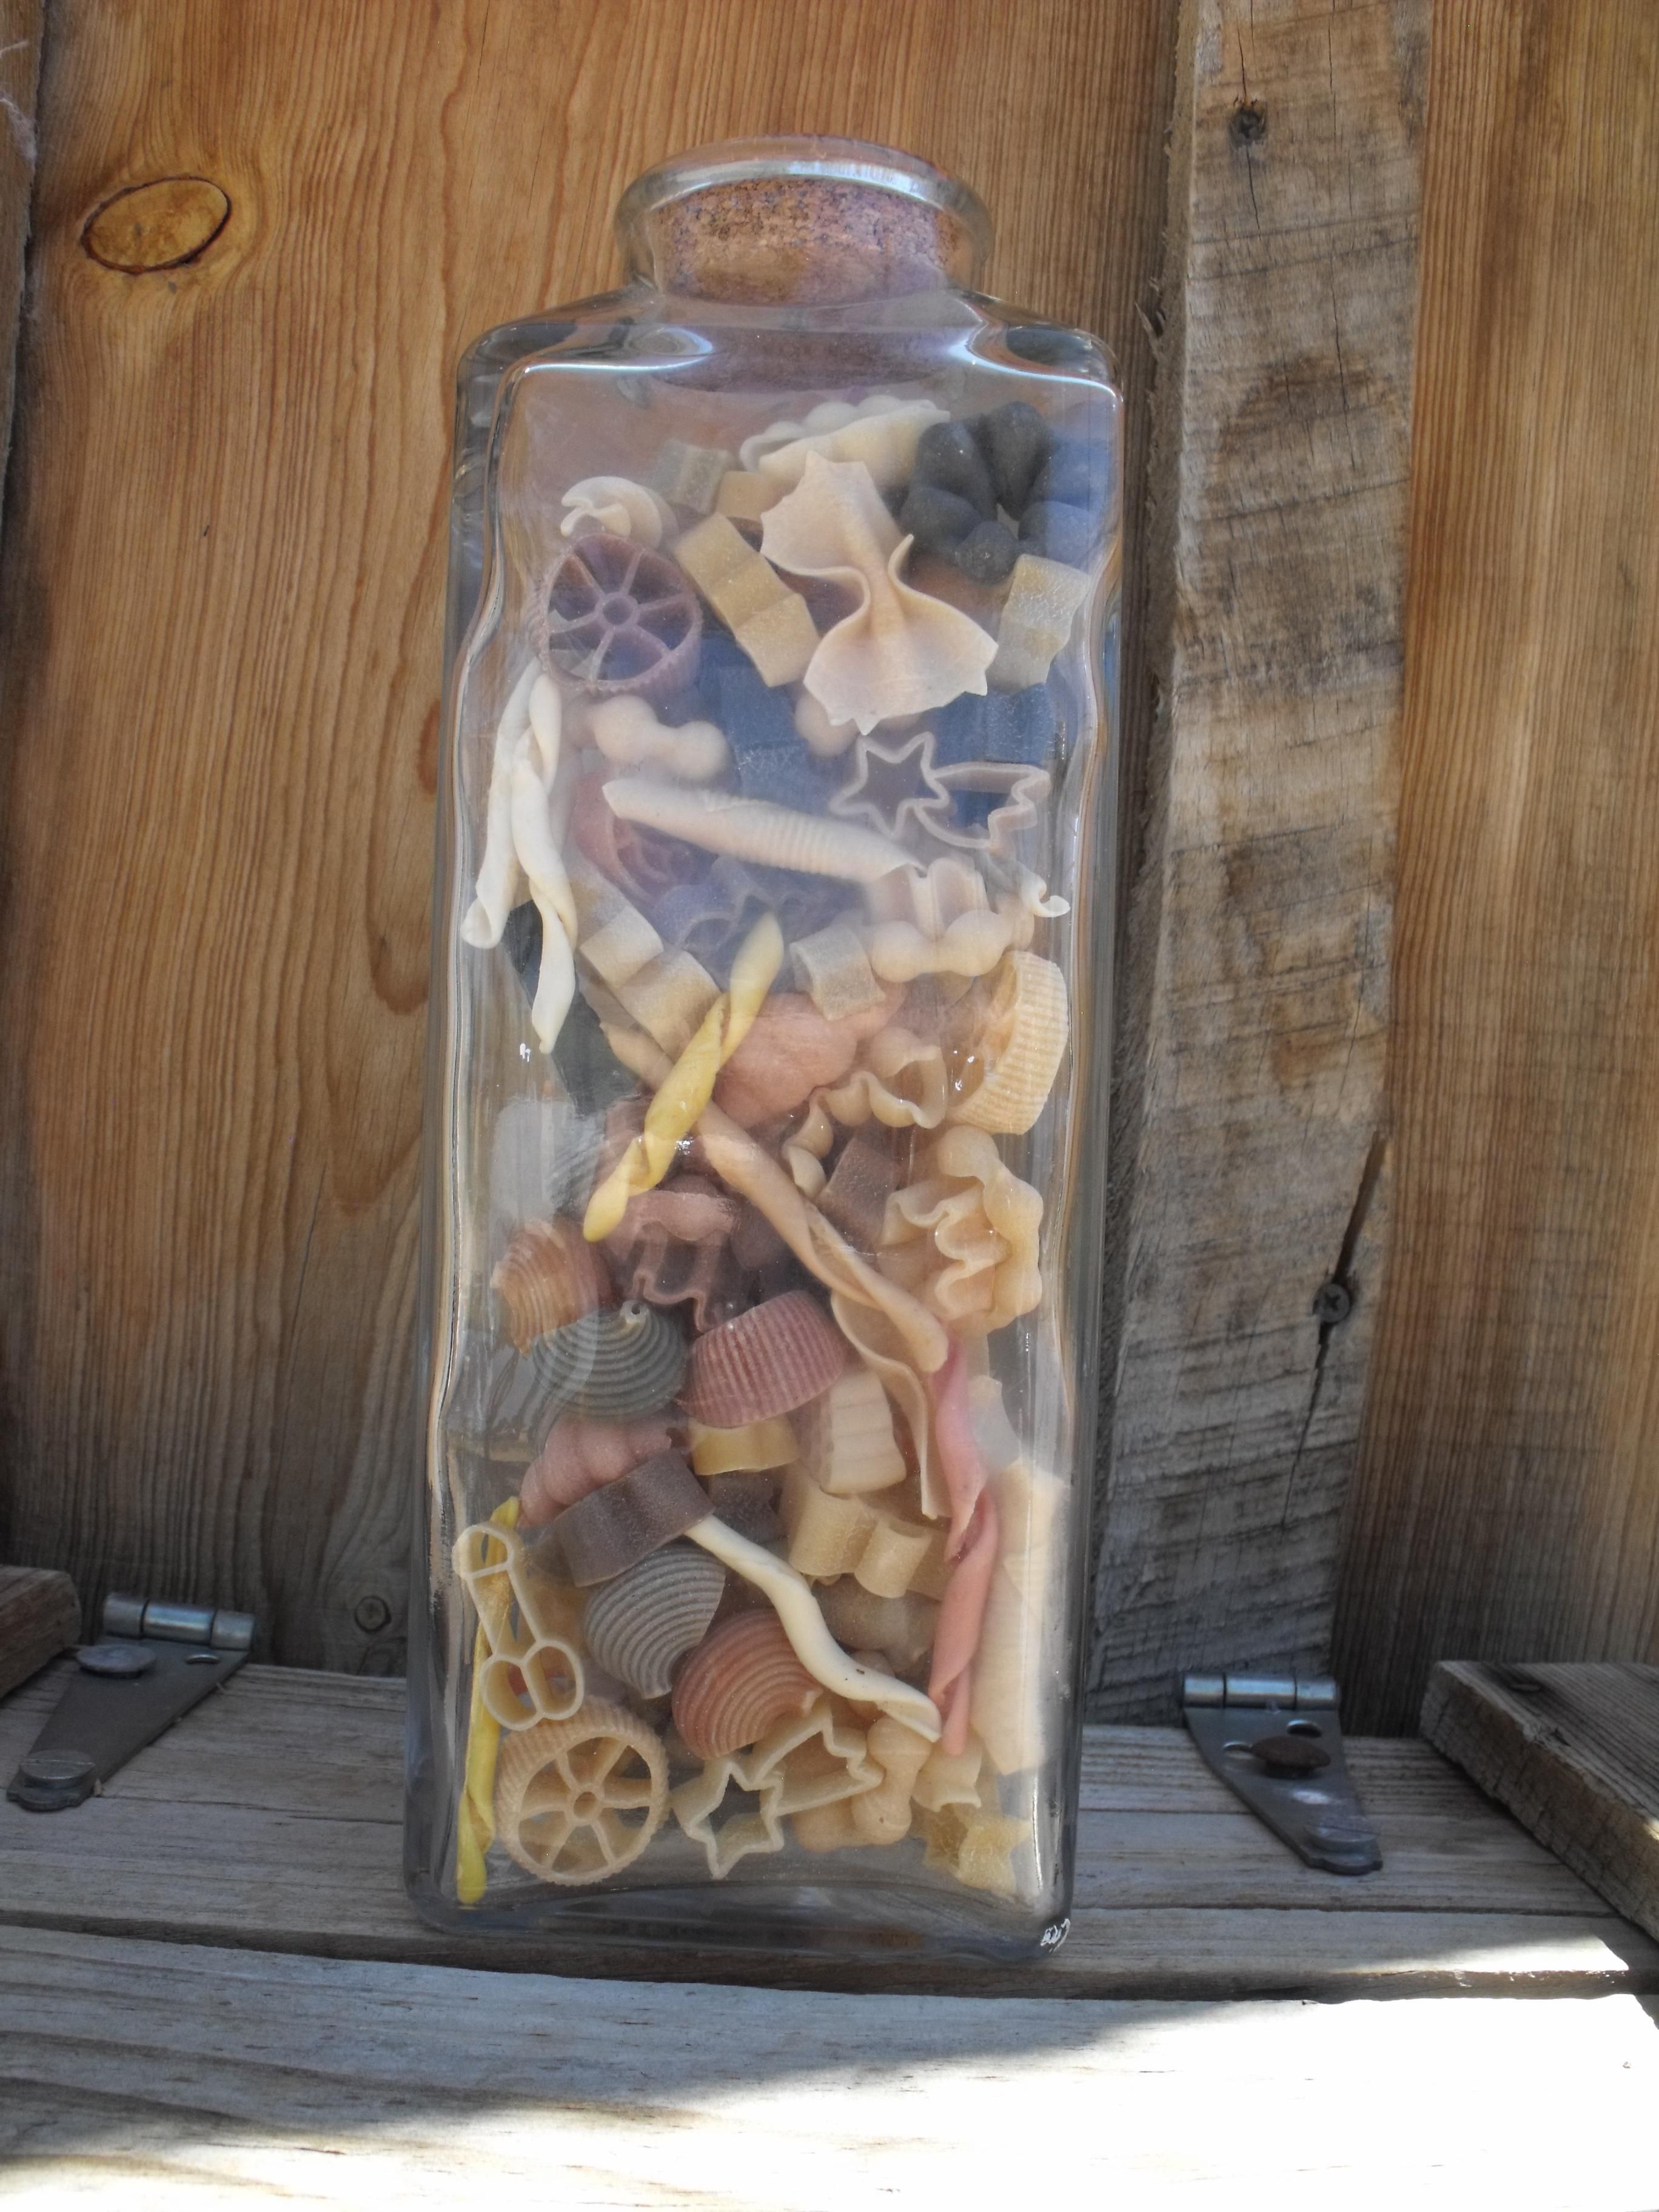 My mother brought back some pasta from Italy. Bears, wheels, shells, trees, twists, stars, bows, honeycomb, flowers ..... and ..... and ... WTH is THAT?